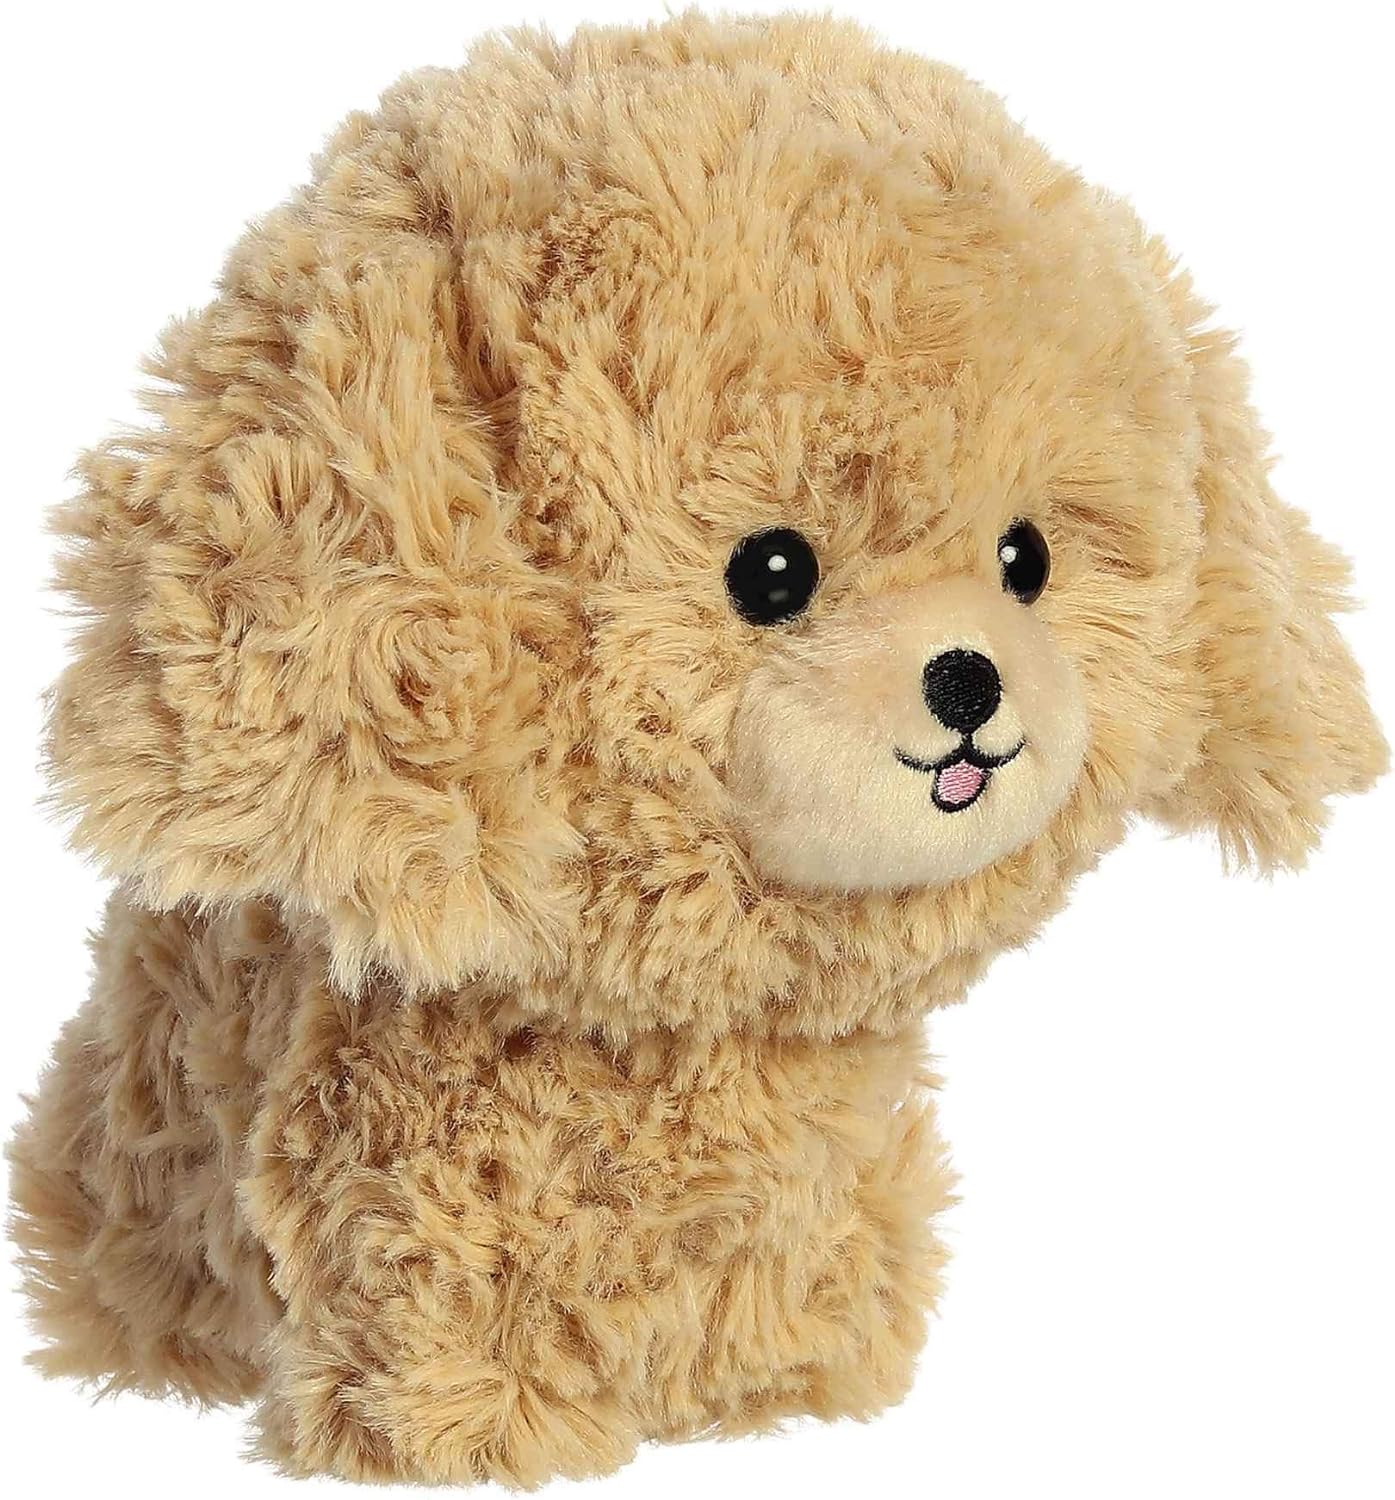 Aurora® Playful Teddy Pets™ Goldendoodle Stuffed Animal - Unique Design - Endless Play - Yellow 7 Inches